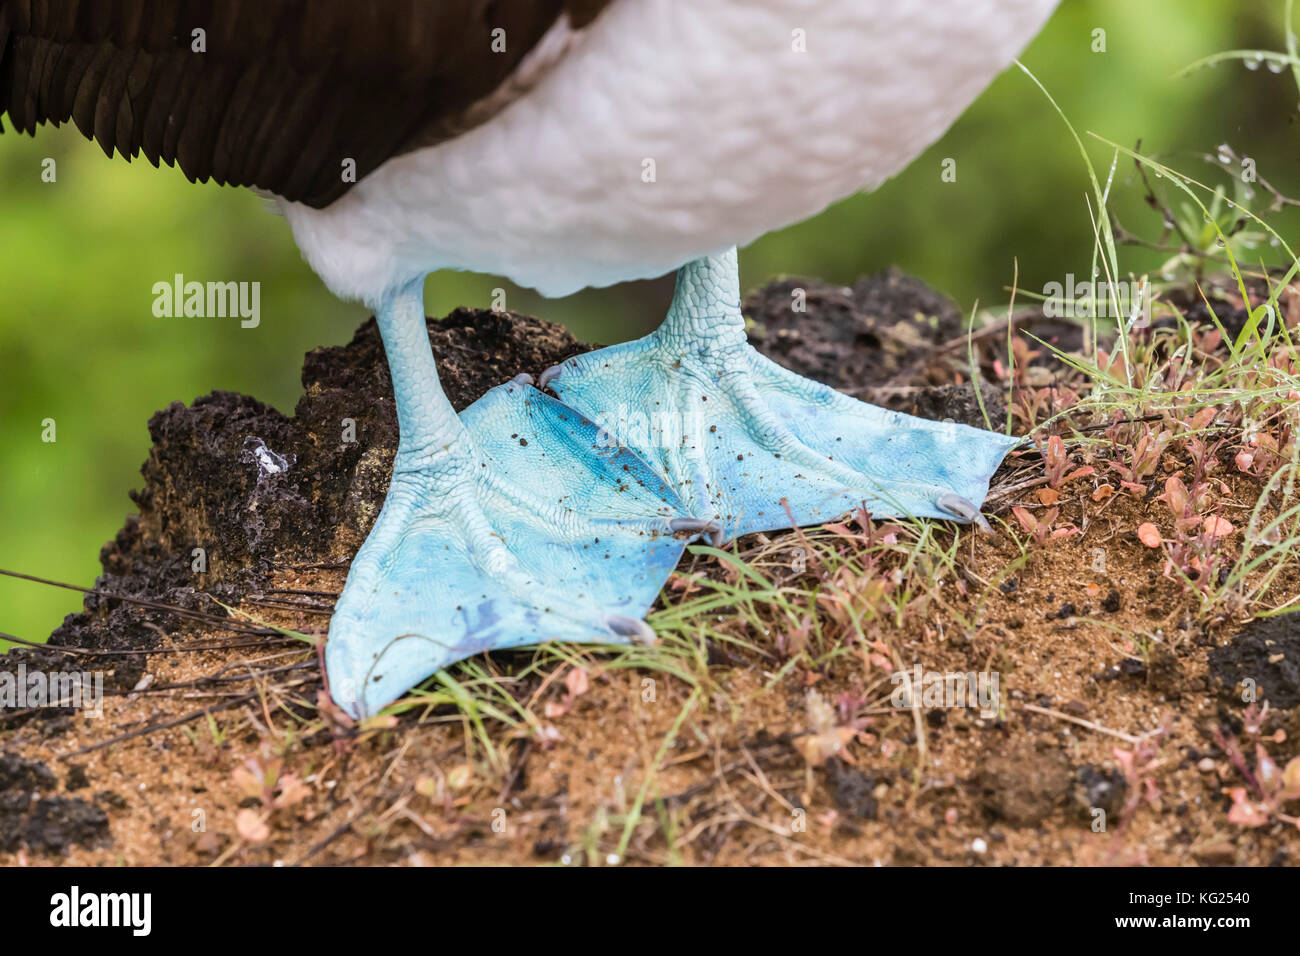 Adult blue-footed booby (Sula nebouxii), feet detail on San Cristobal Island, Galapagos, Ecuador, South America Stock Photo